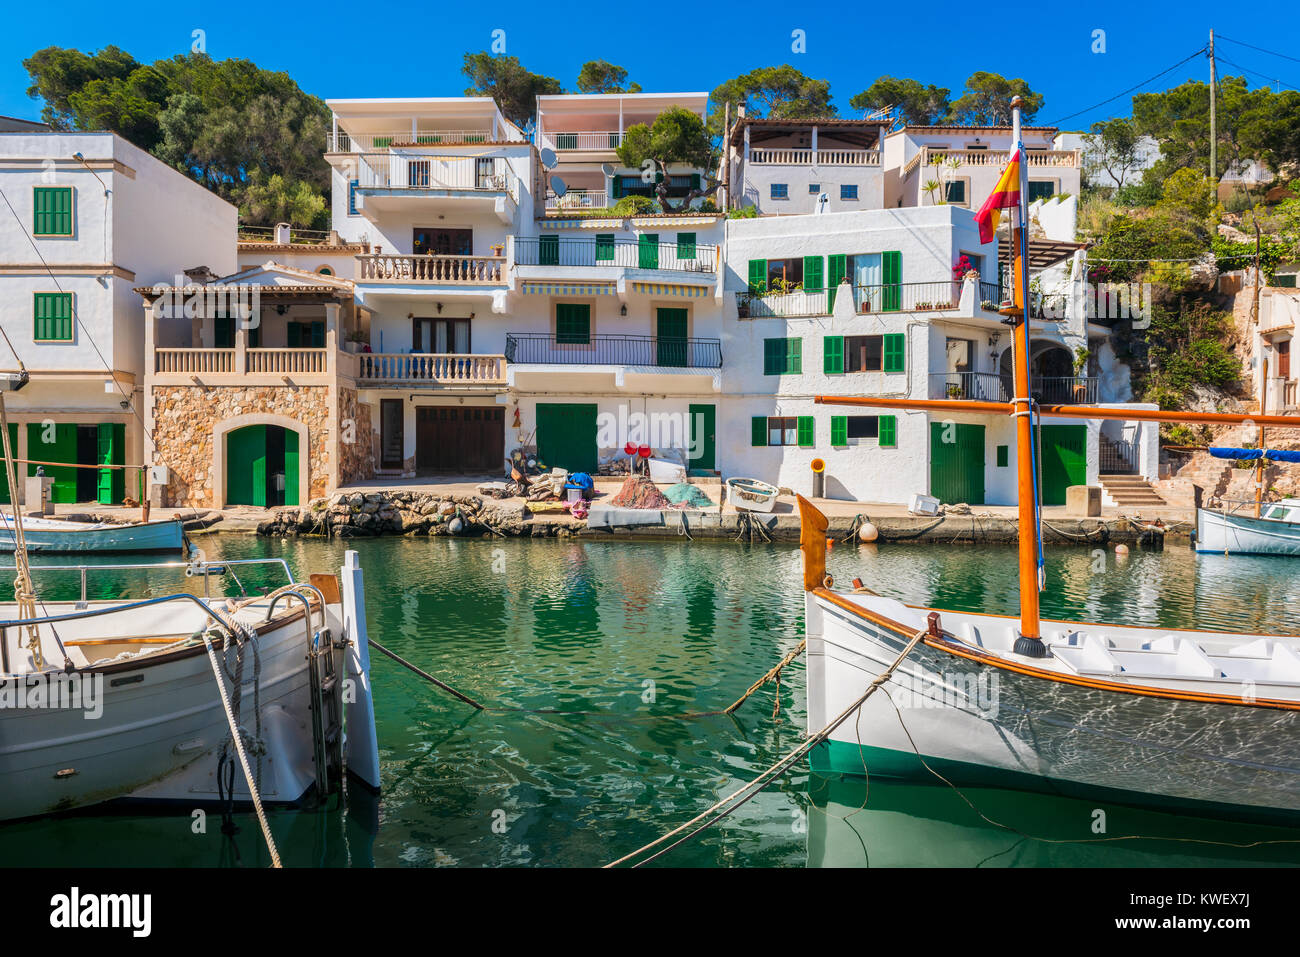 Boats in Canal in Cala Figuera Mallorca Spain Stock Photo